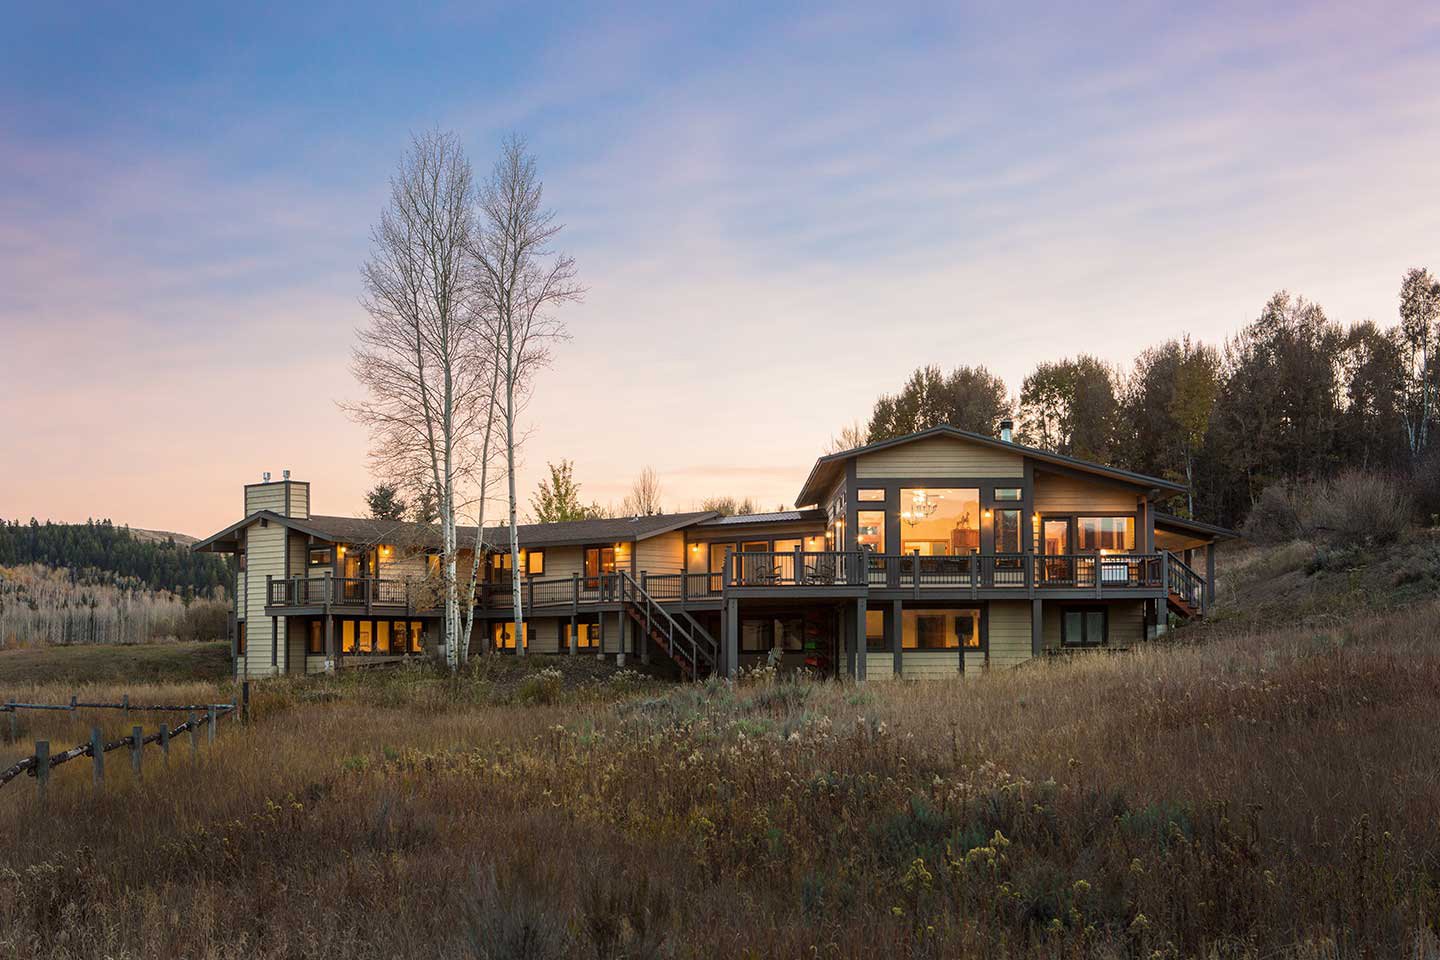 Residence at twilight with tall aspen trees